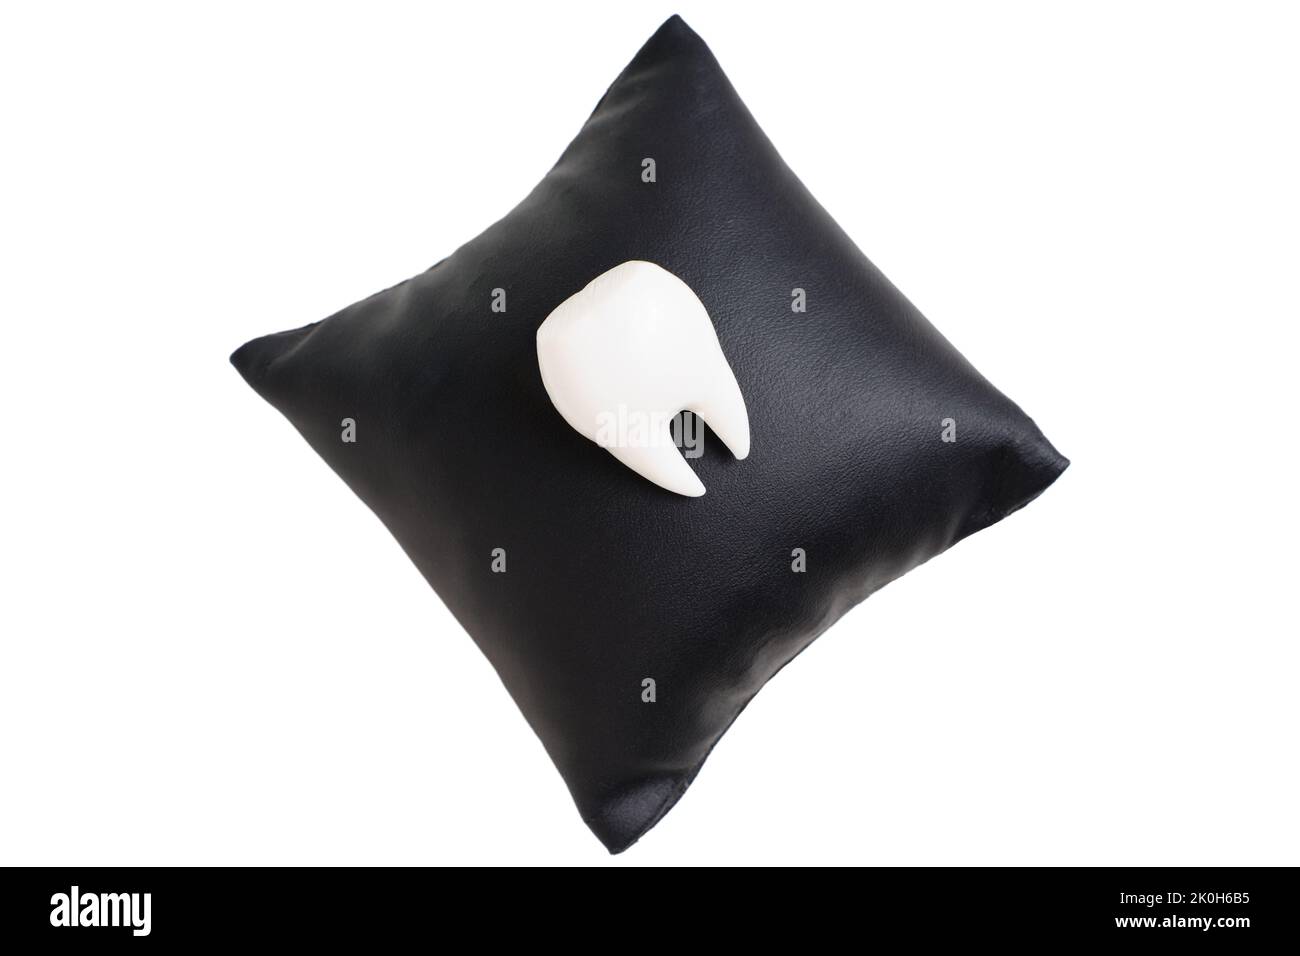 Large white tooth on a black leather pillow isolated on white. Comfortable dental care concept. Stock Photo